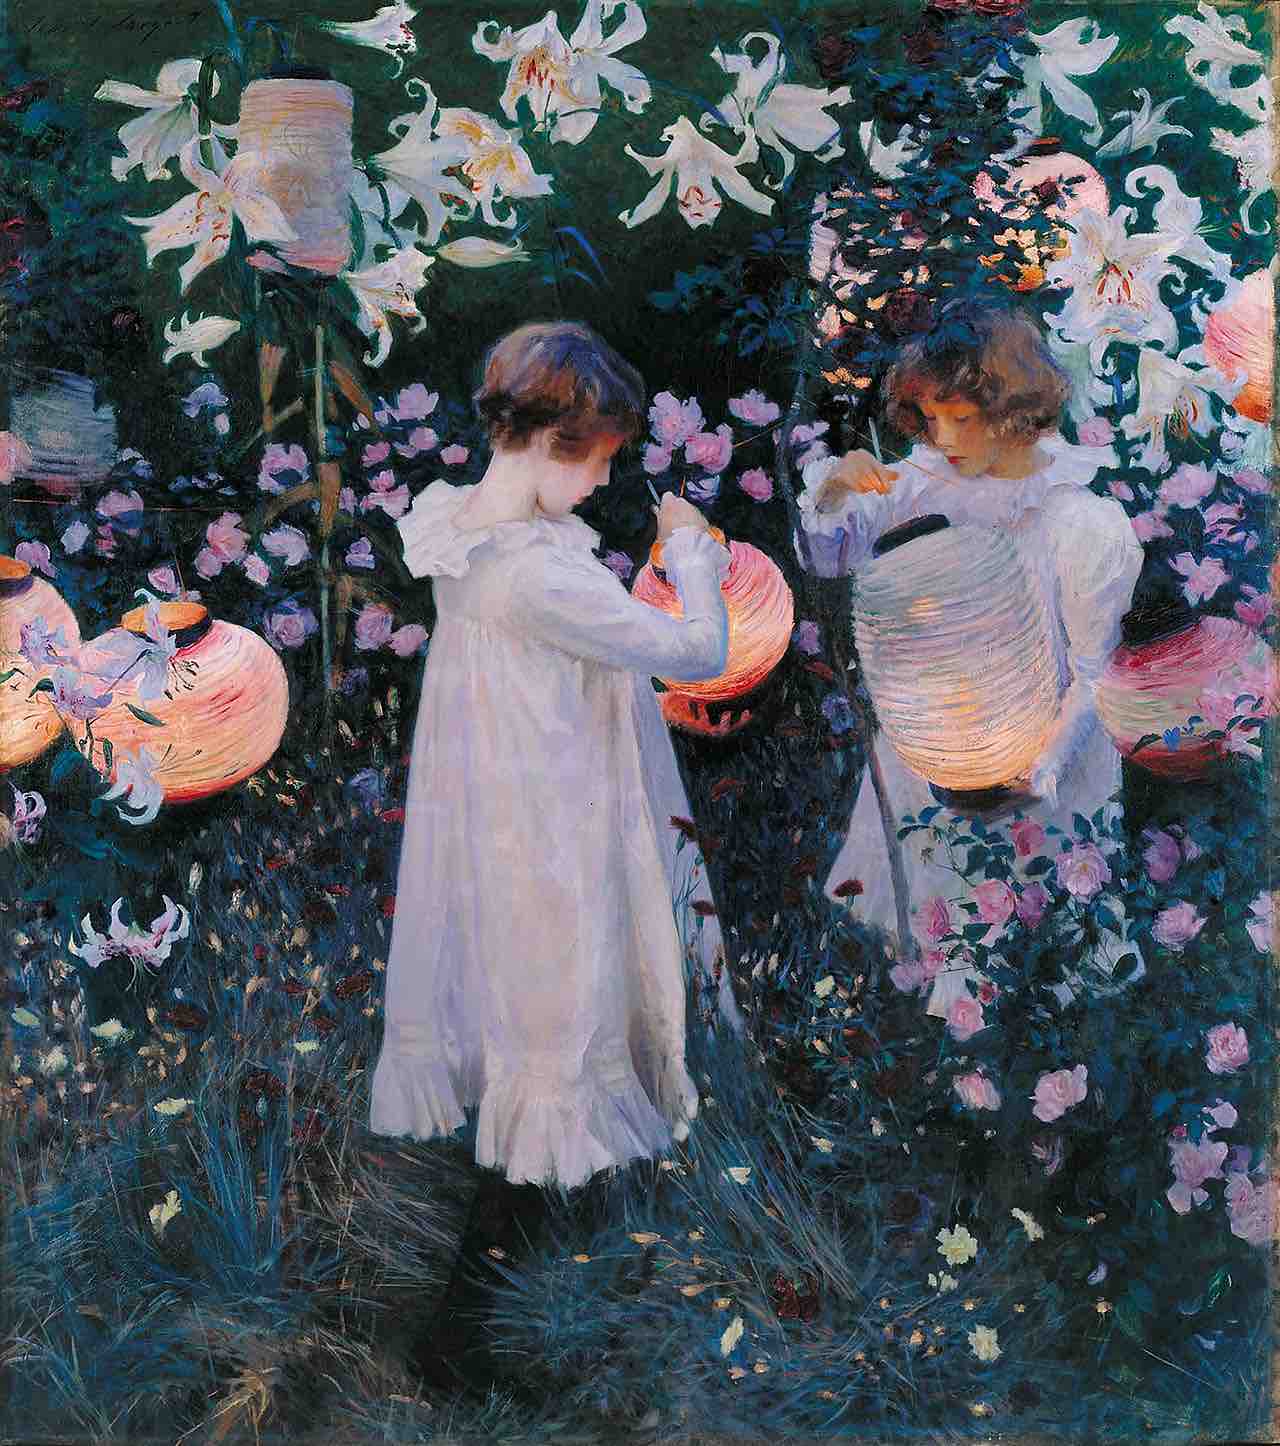 John Singer Sargent Painting Carnation, Lily, Lily Rose